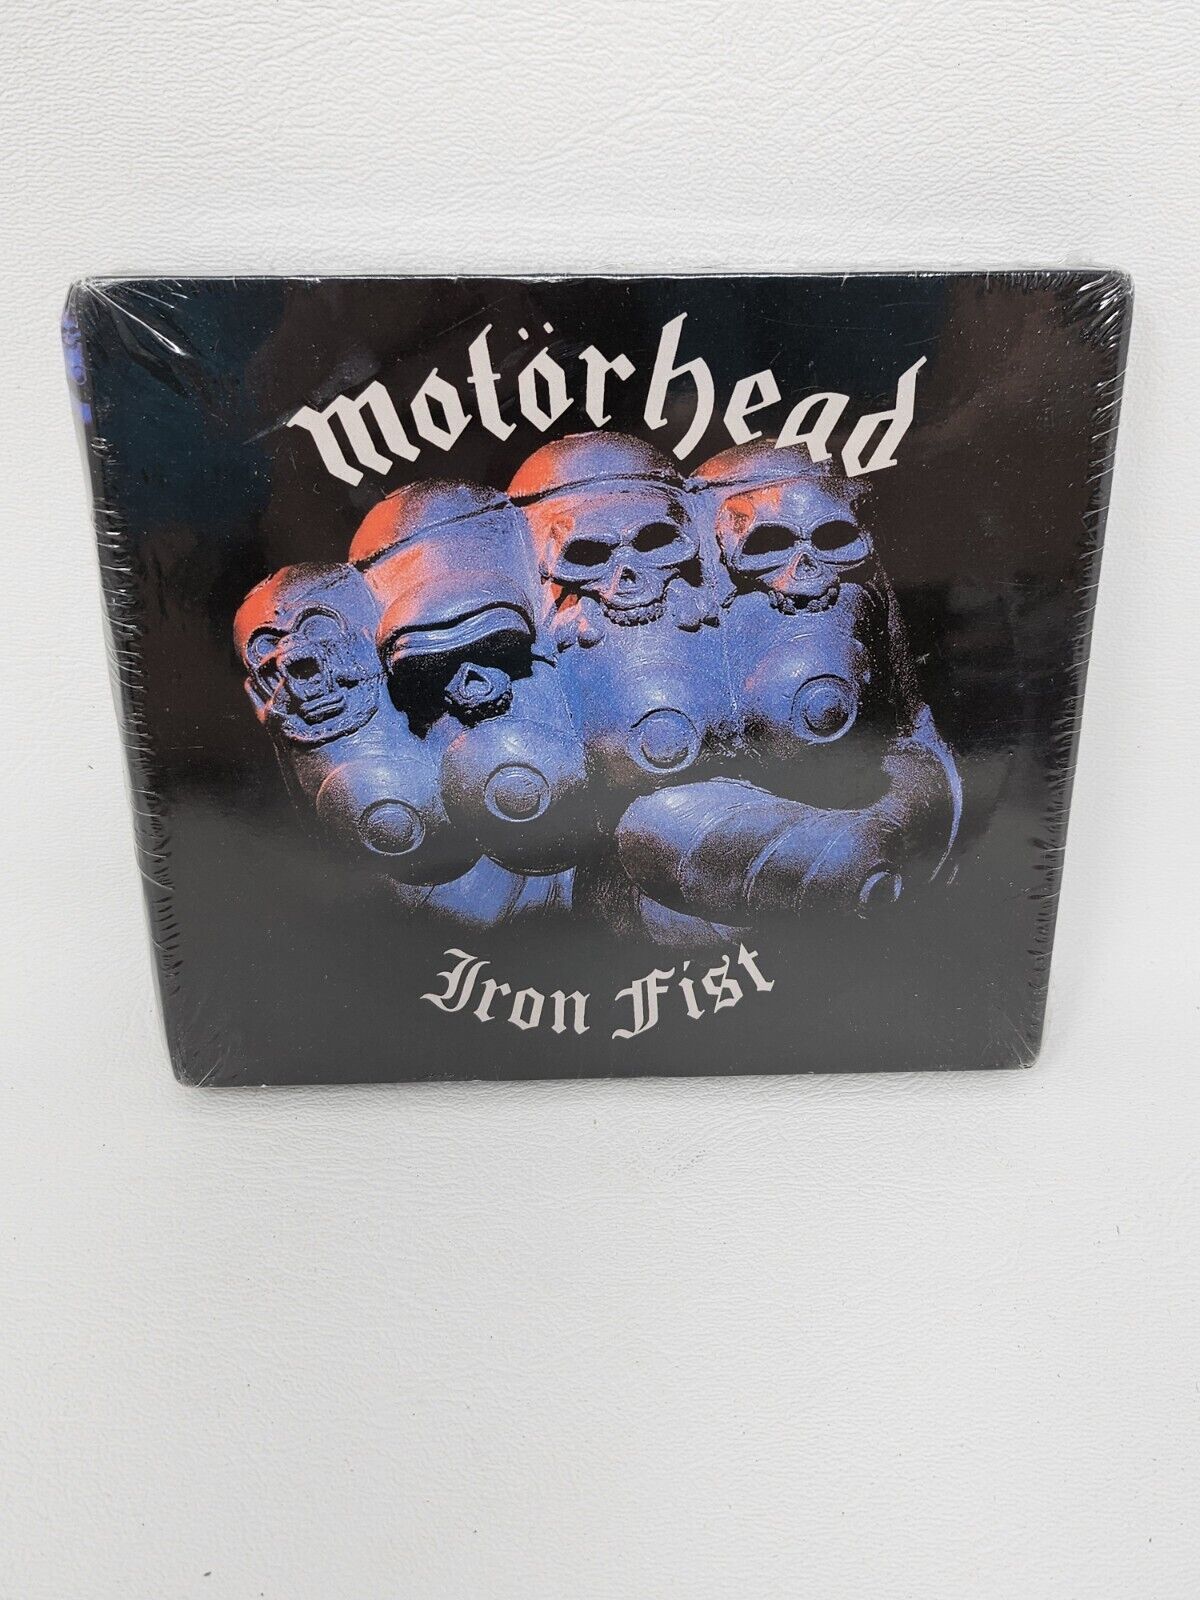 Motorhead - Iron Fist: Deluxe Edition *New/Sealed/Dented Case*